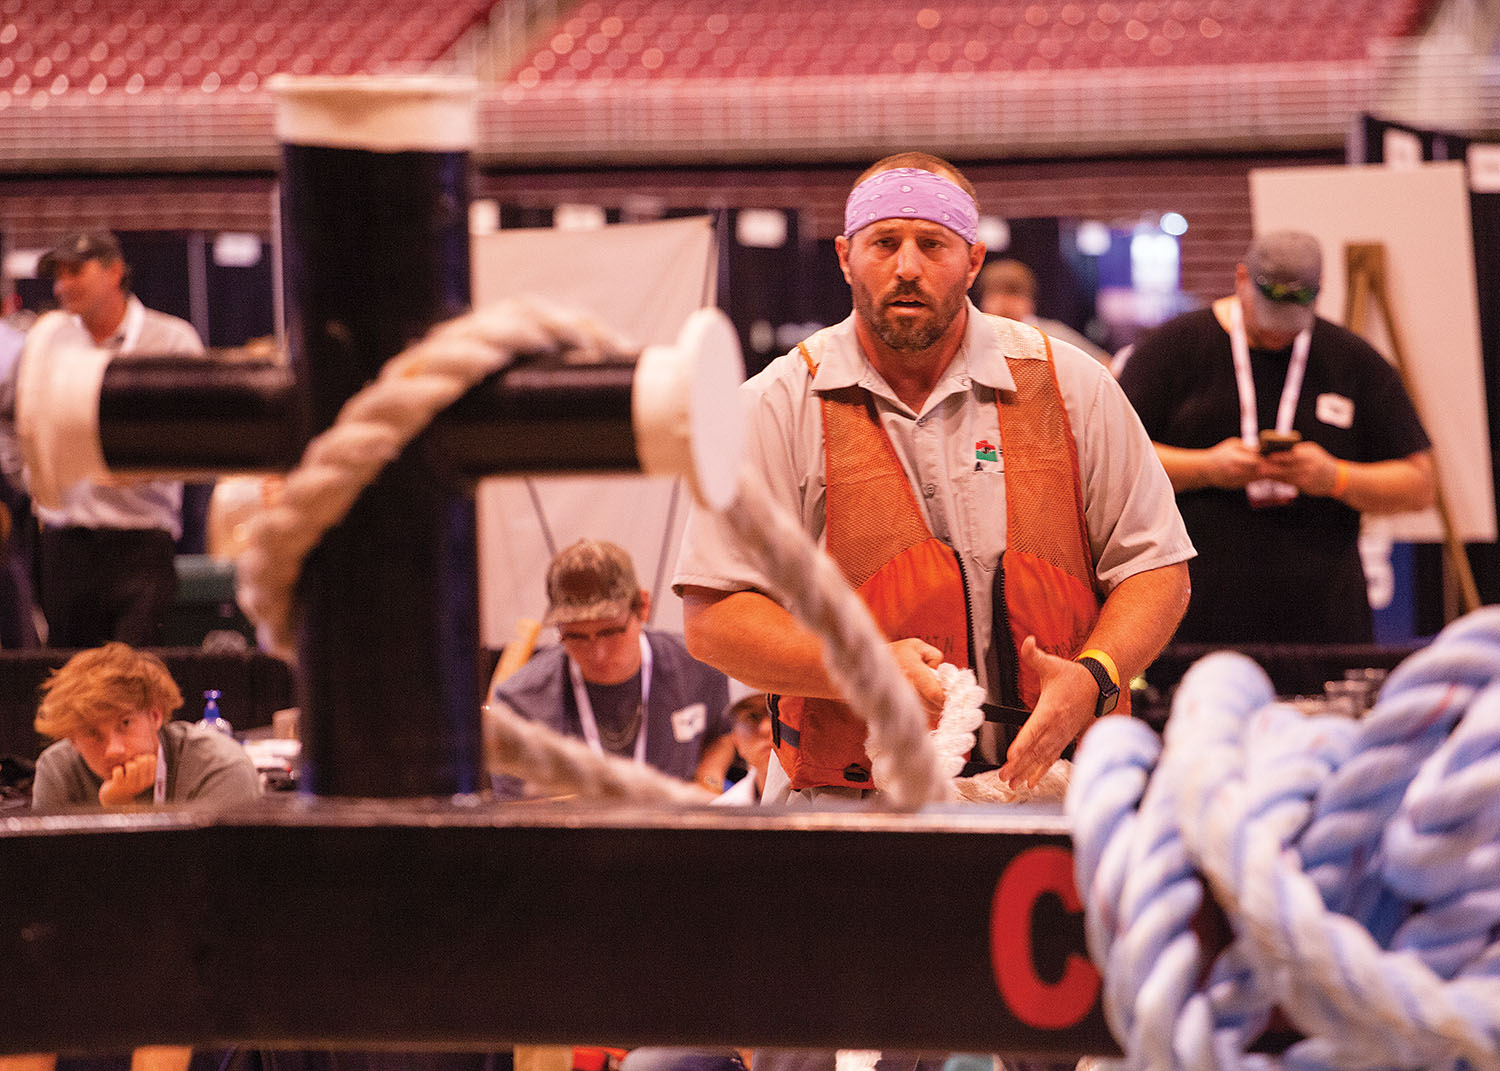 Maritime Throwdown at IMX 2021. (Photo by Frank McCormack)